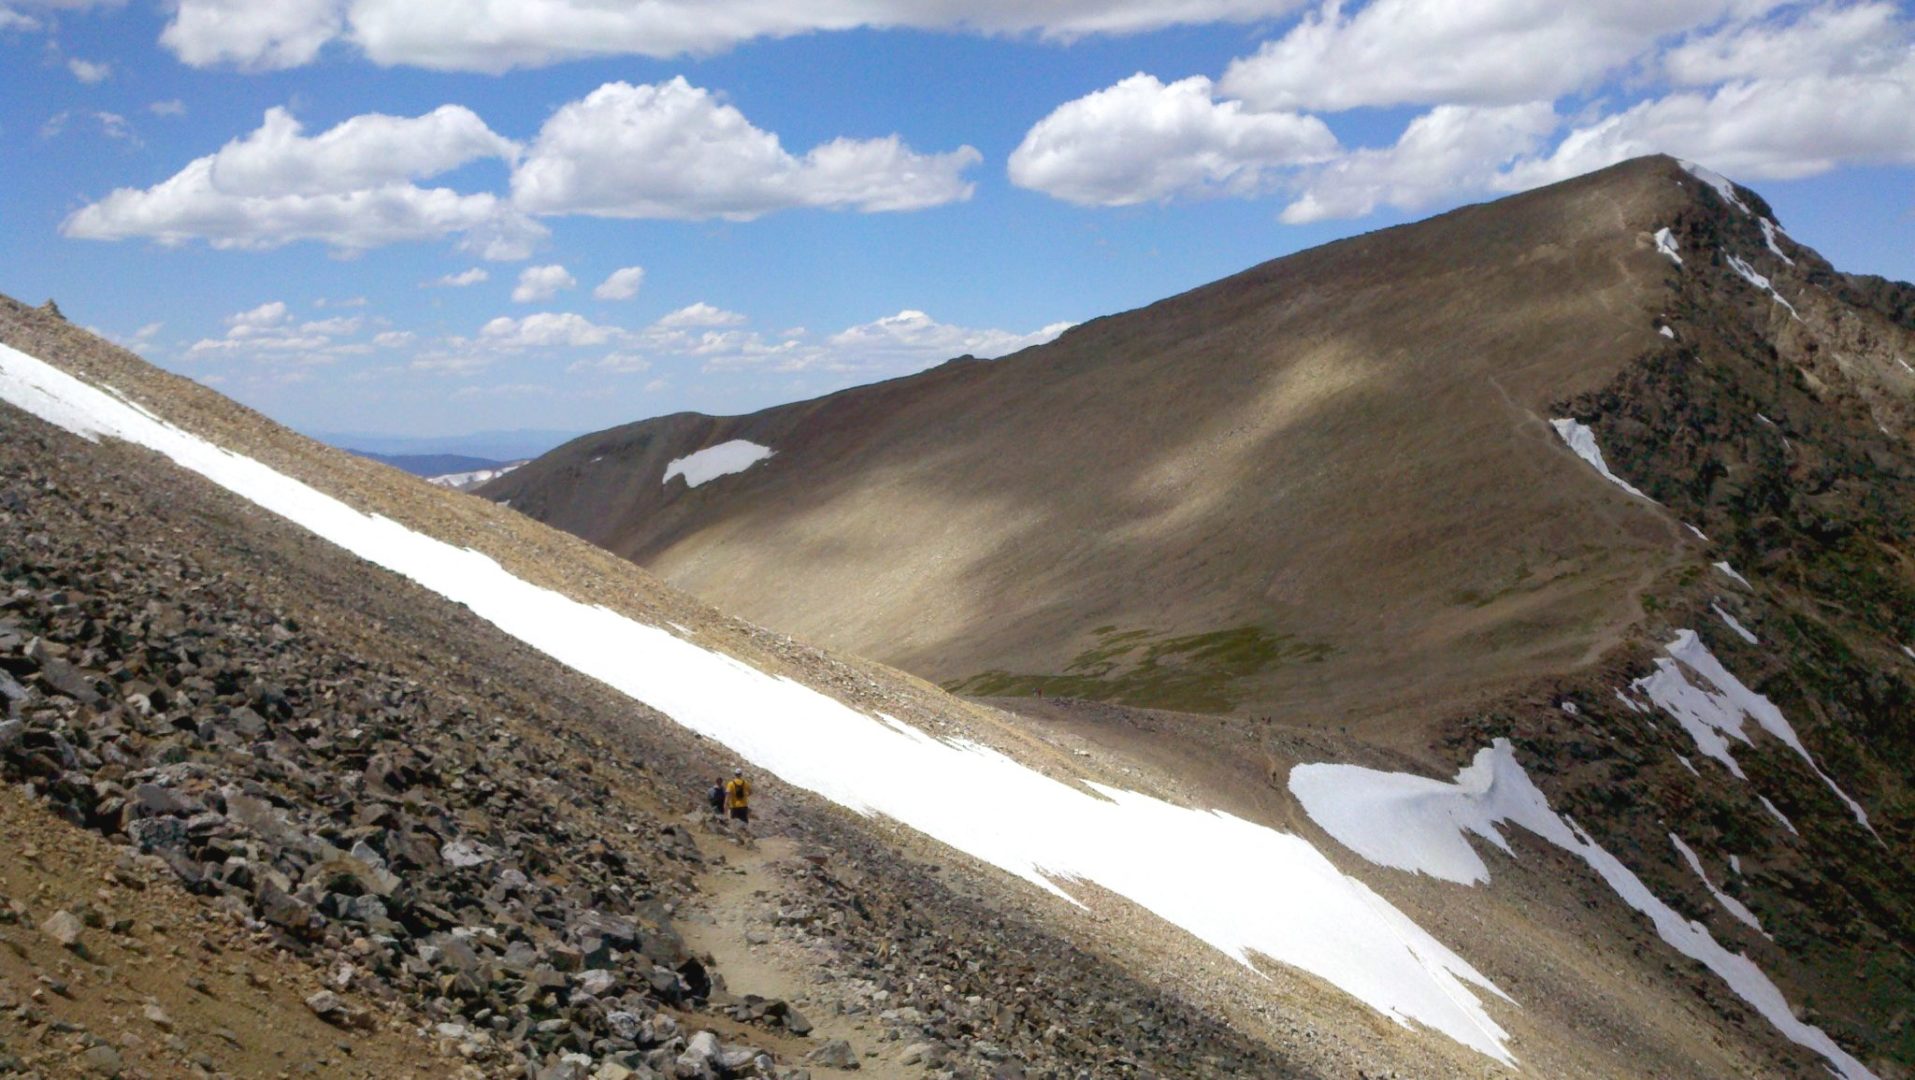 On the saddle between Grays and Torreys